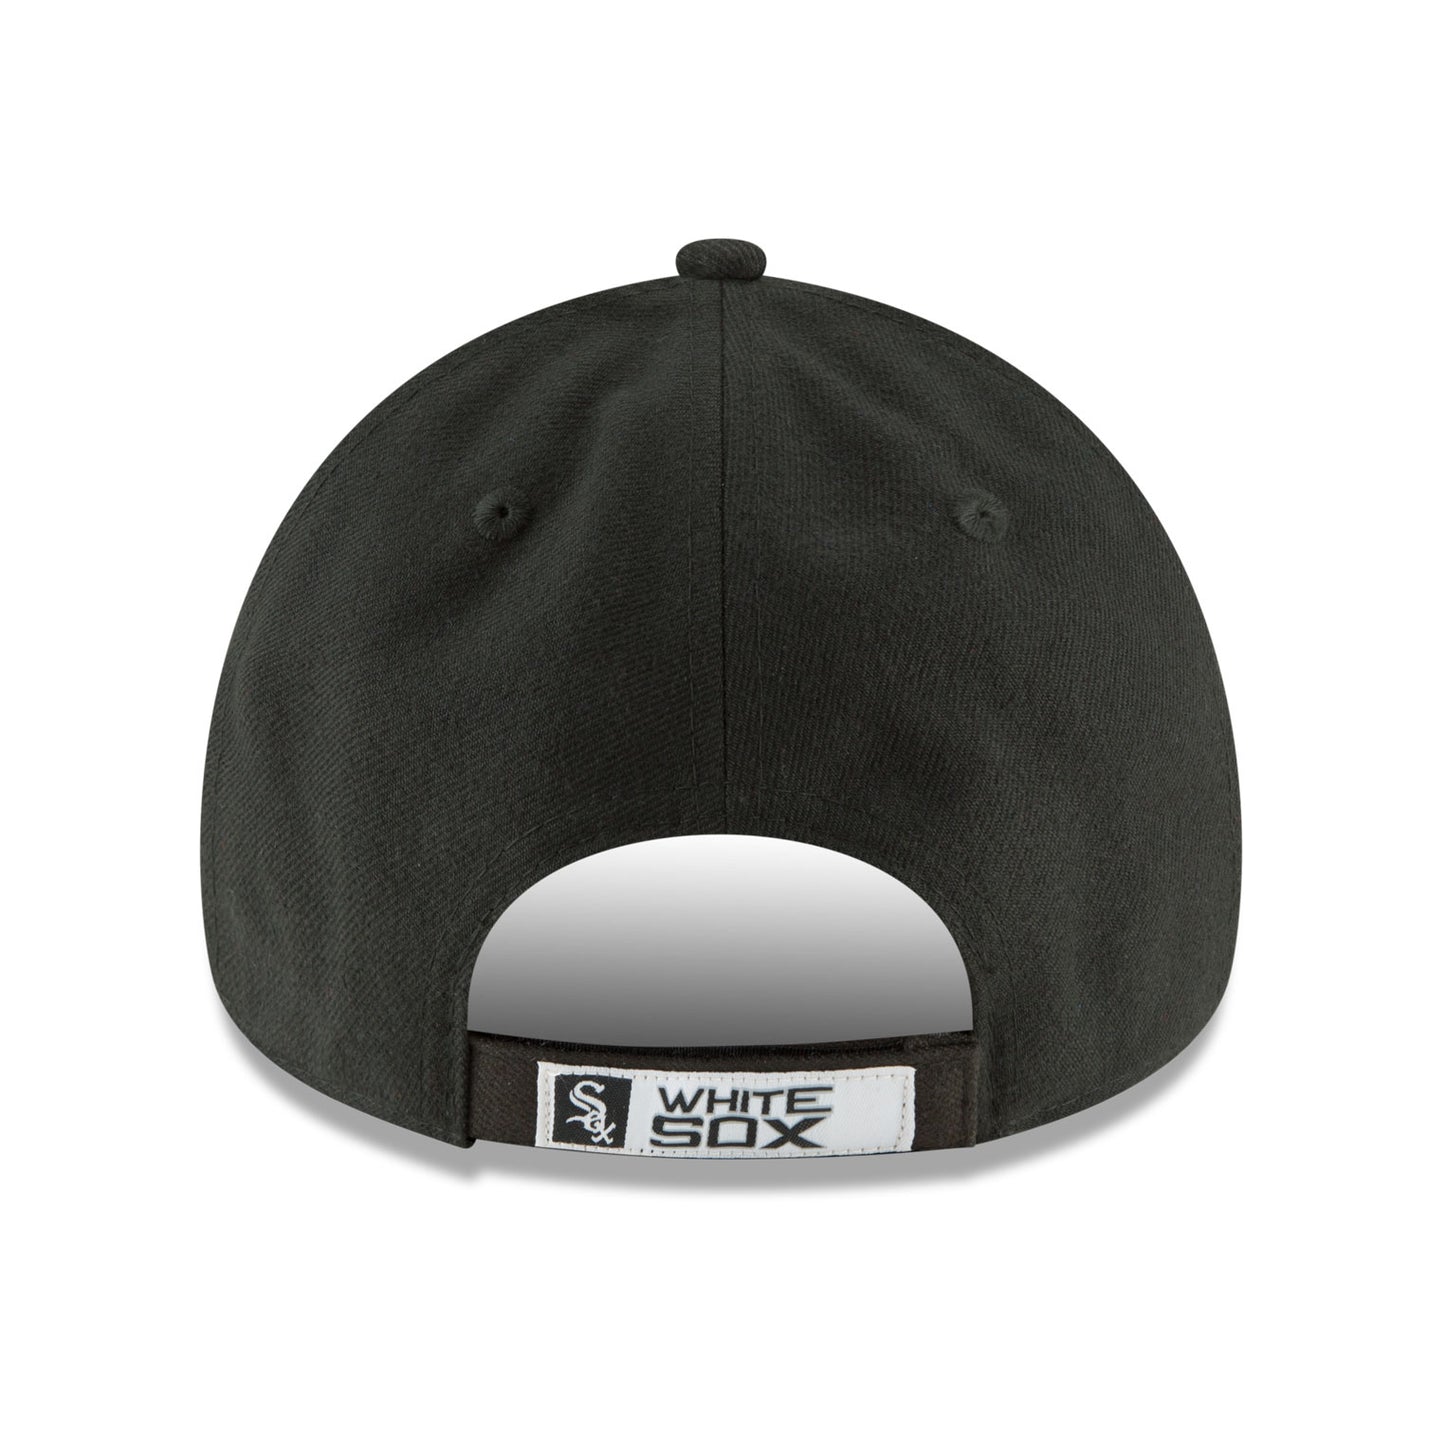 THE LEAGUE Chicago White Sox 9FORTY New Era Cap